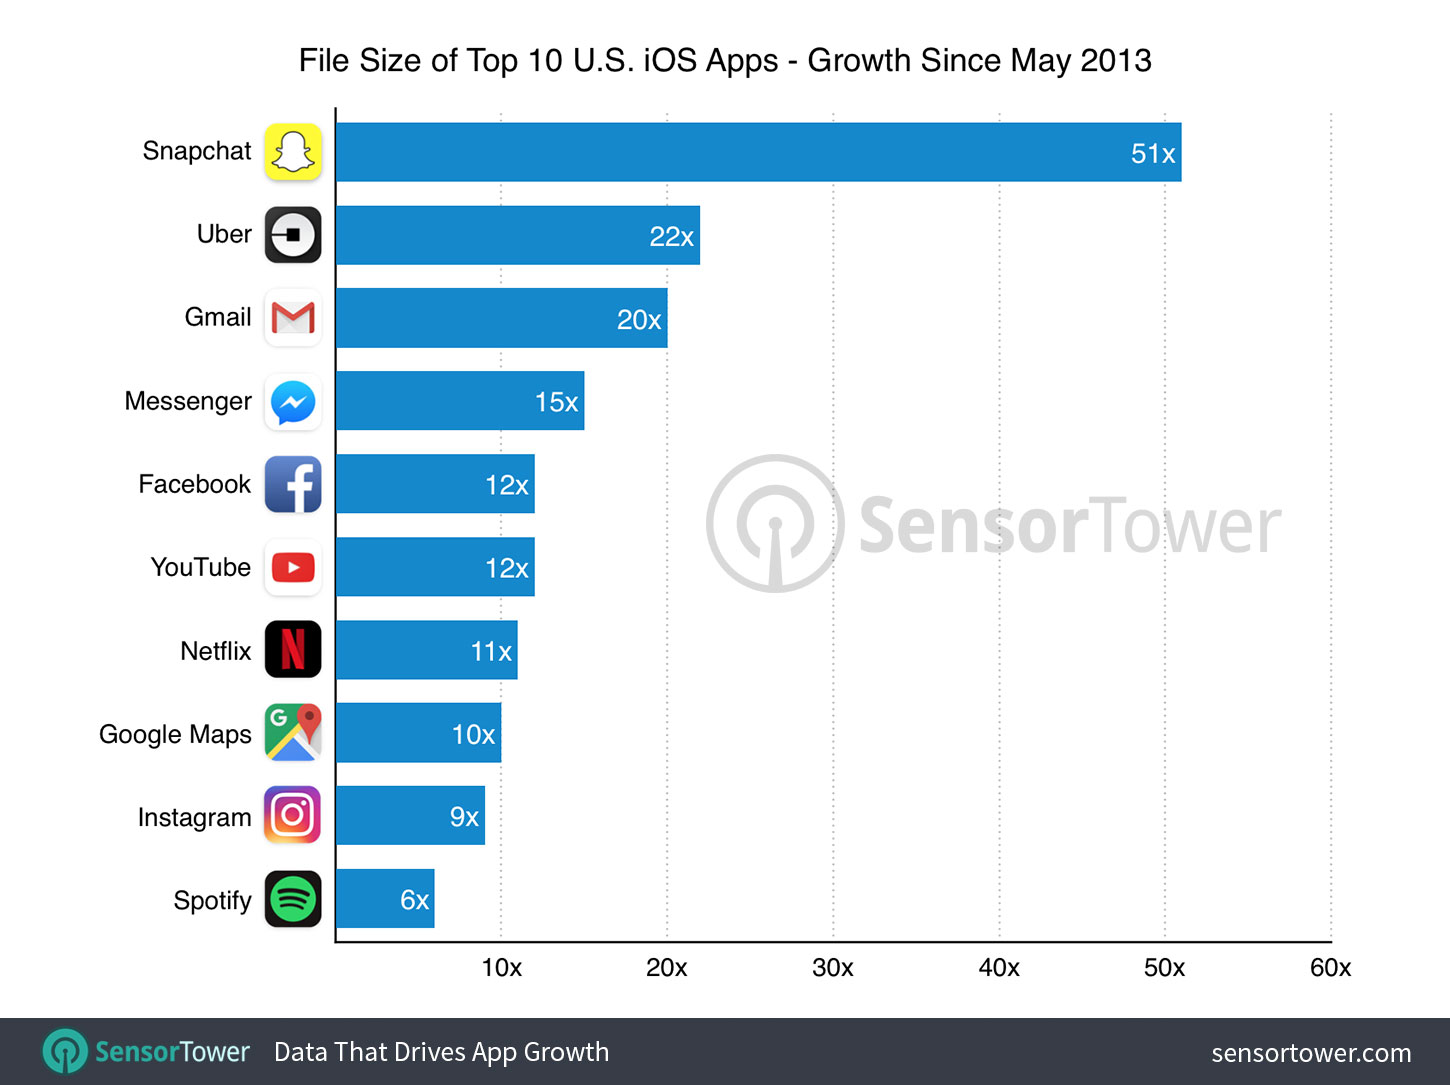 top-10-ios-apps-size-by-growth.jpg